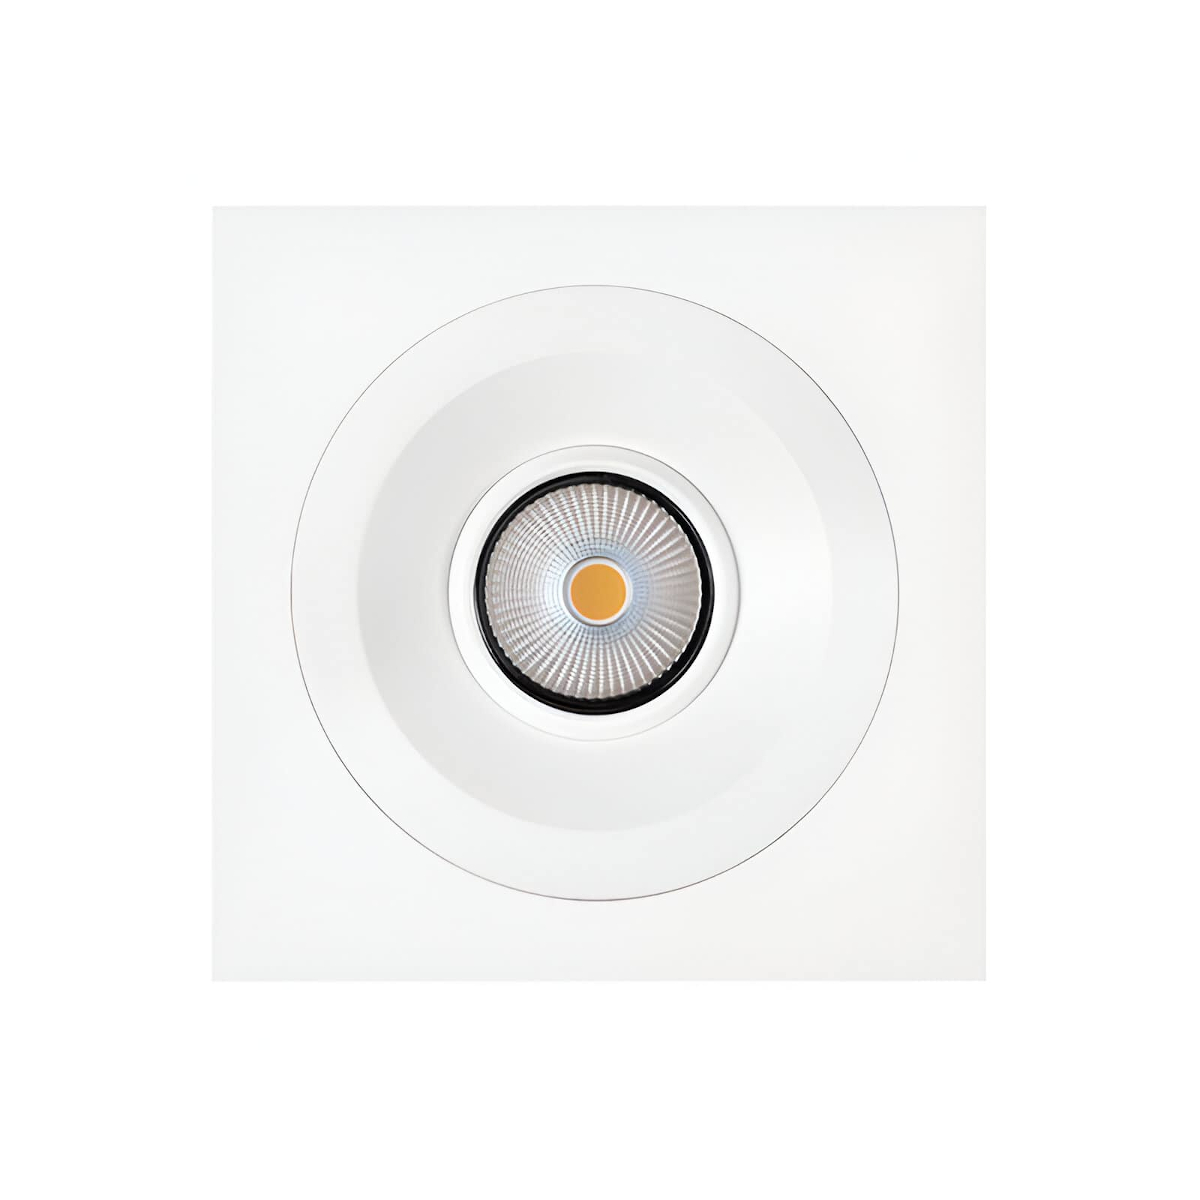 Product image of Zela Square white Adapter plate with downlight inside